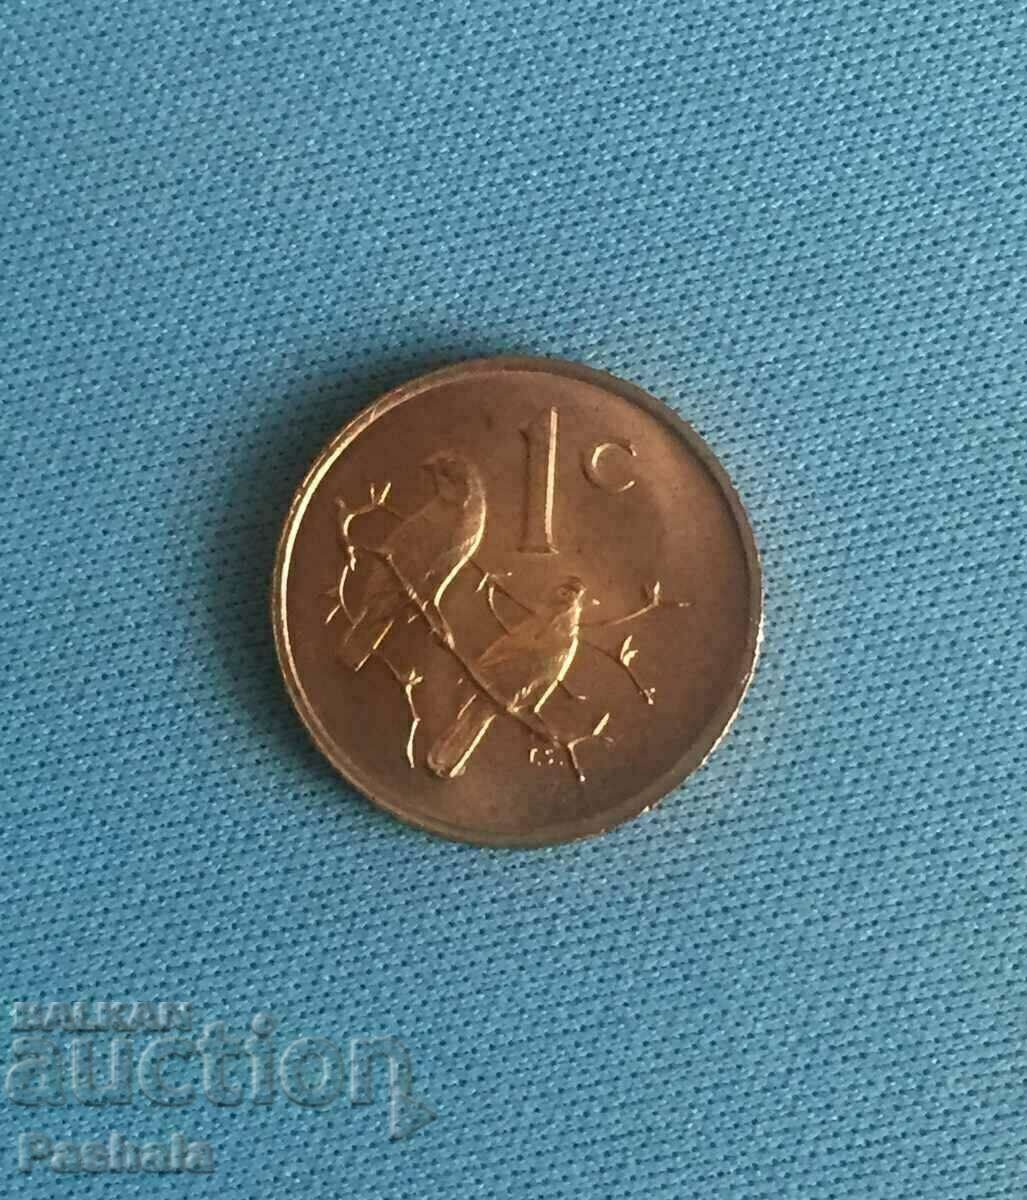 South Africa 1 cent 1969